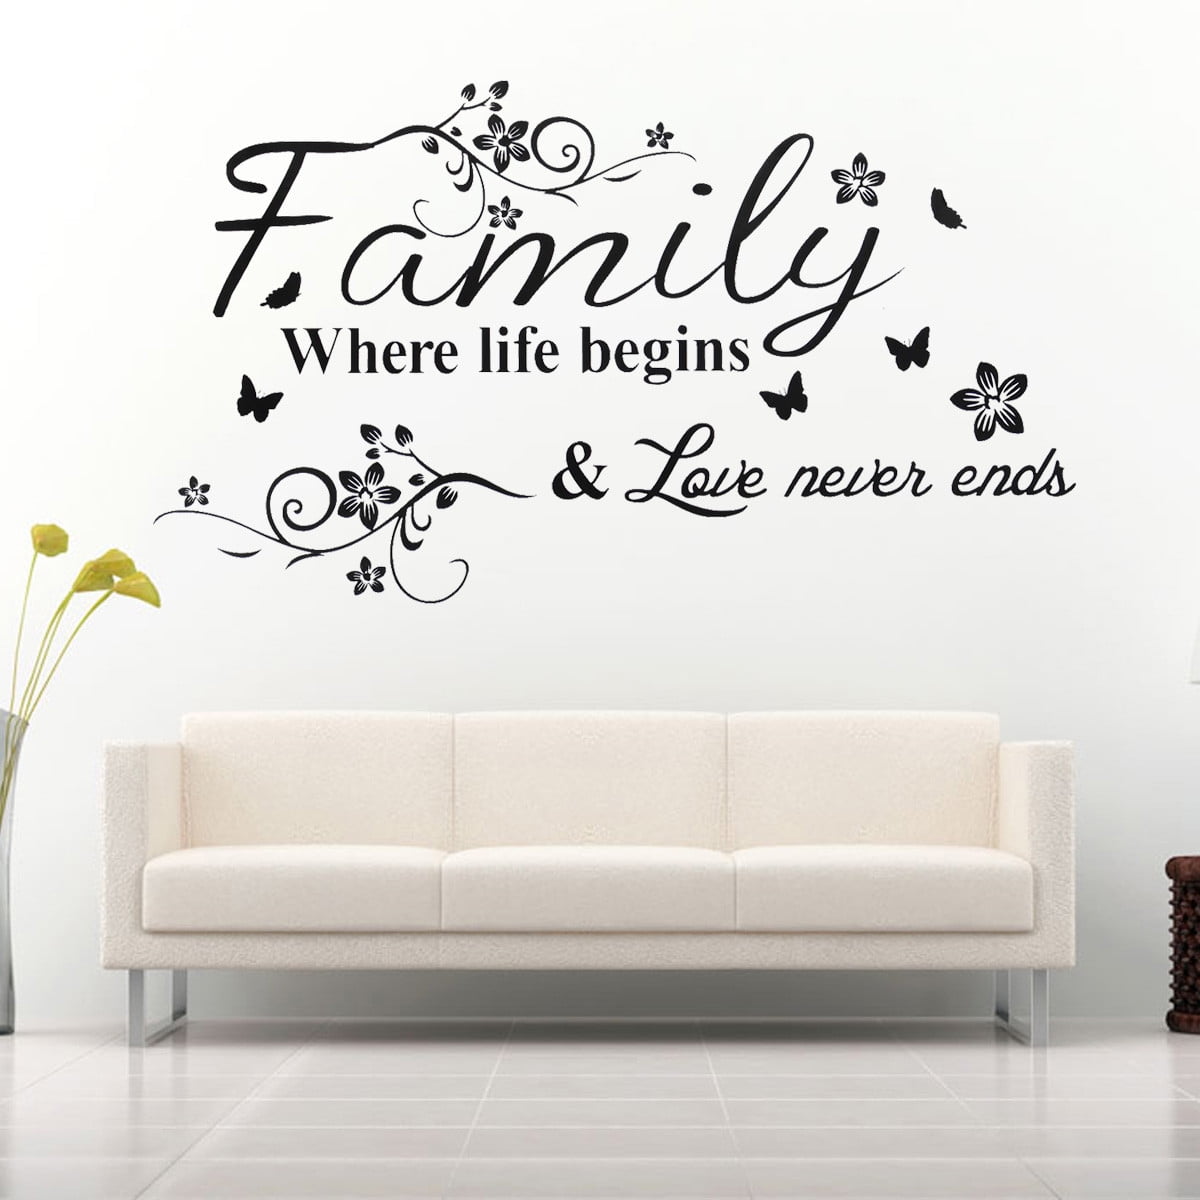 Family DIY Removable Art Vinyl Quote Wall Stickers Decal Mural Home Kids 2018